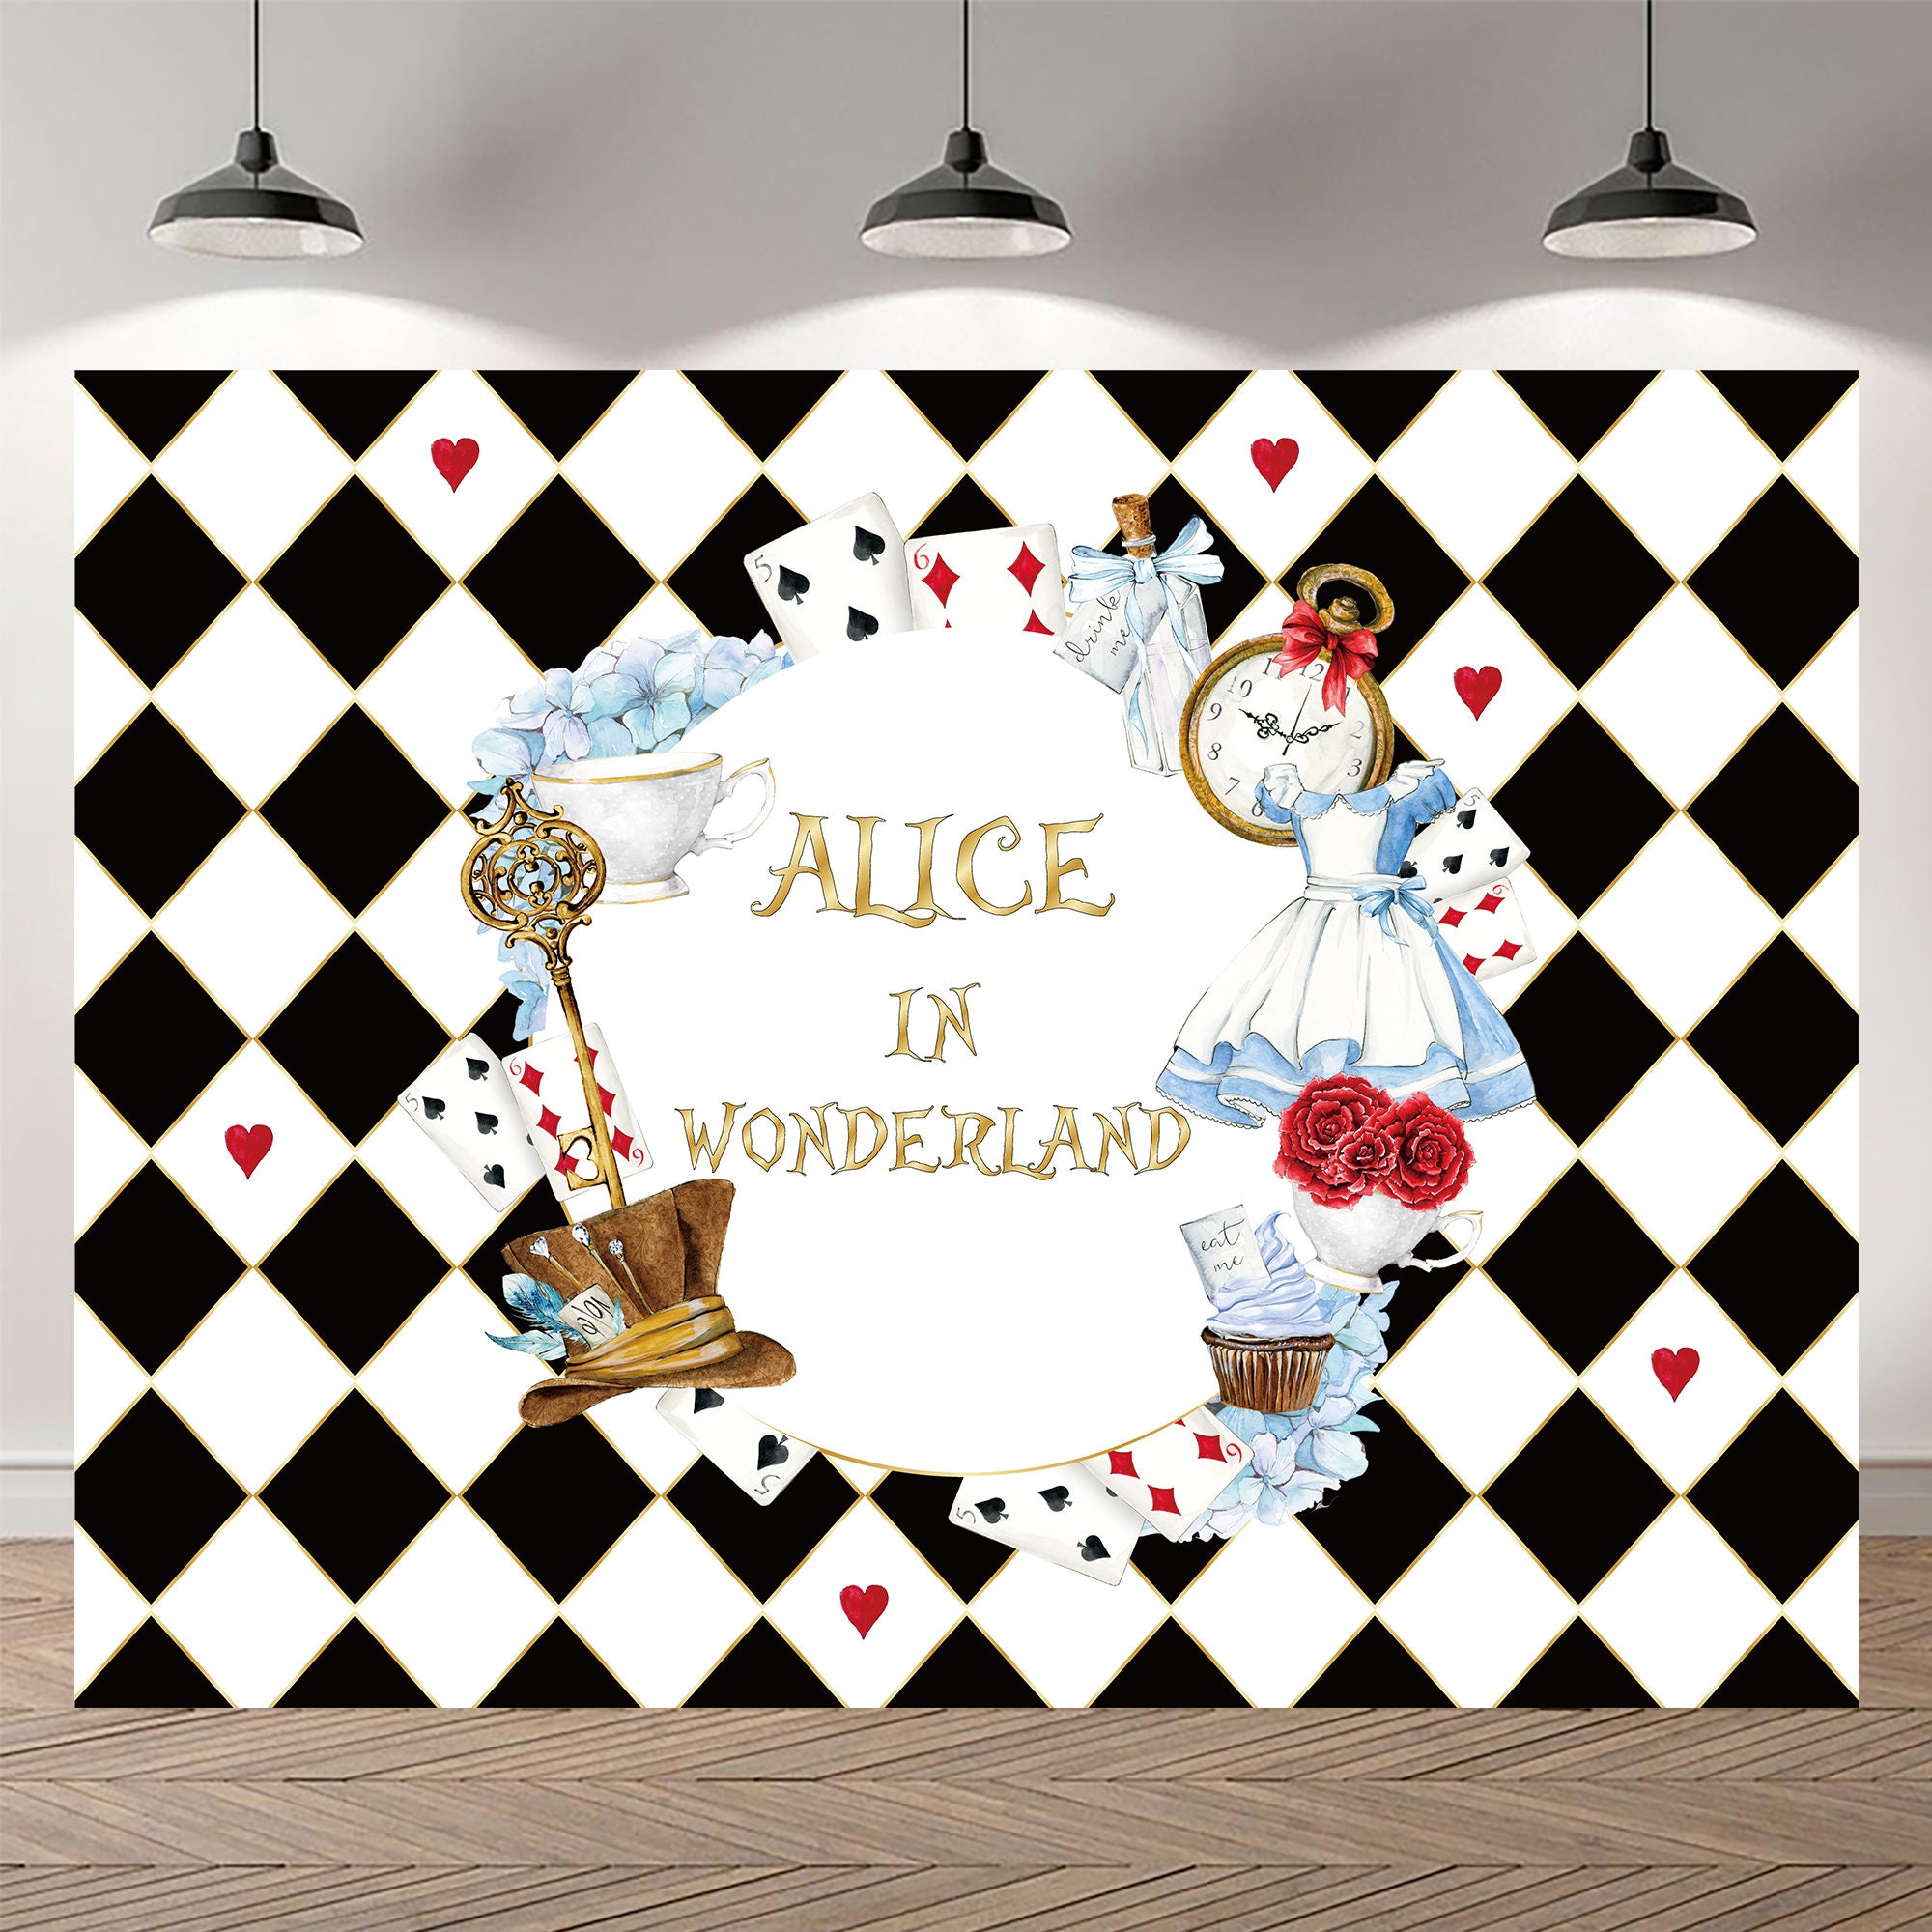 Alice in Wonderland Decoration, Printable PNG for Cricut, PDF, Garland  Banners, Mad Hatter Tea Party, Blue Hooded Card Soldier, Welcome Sign 